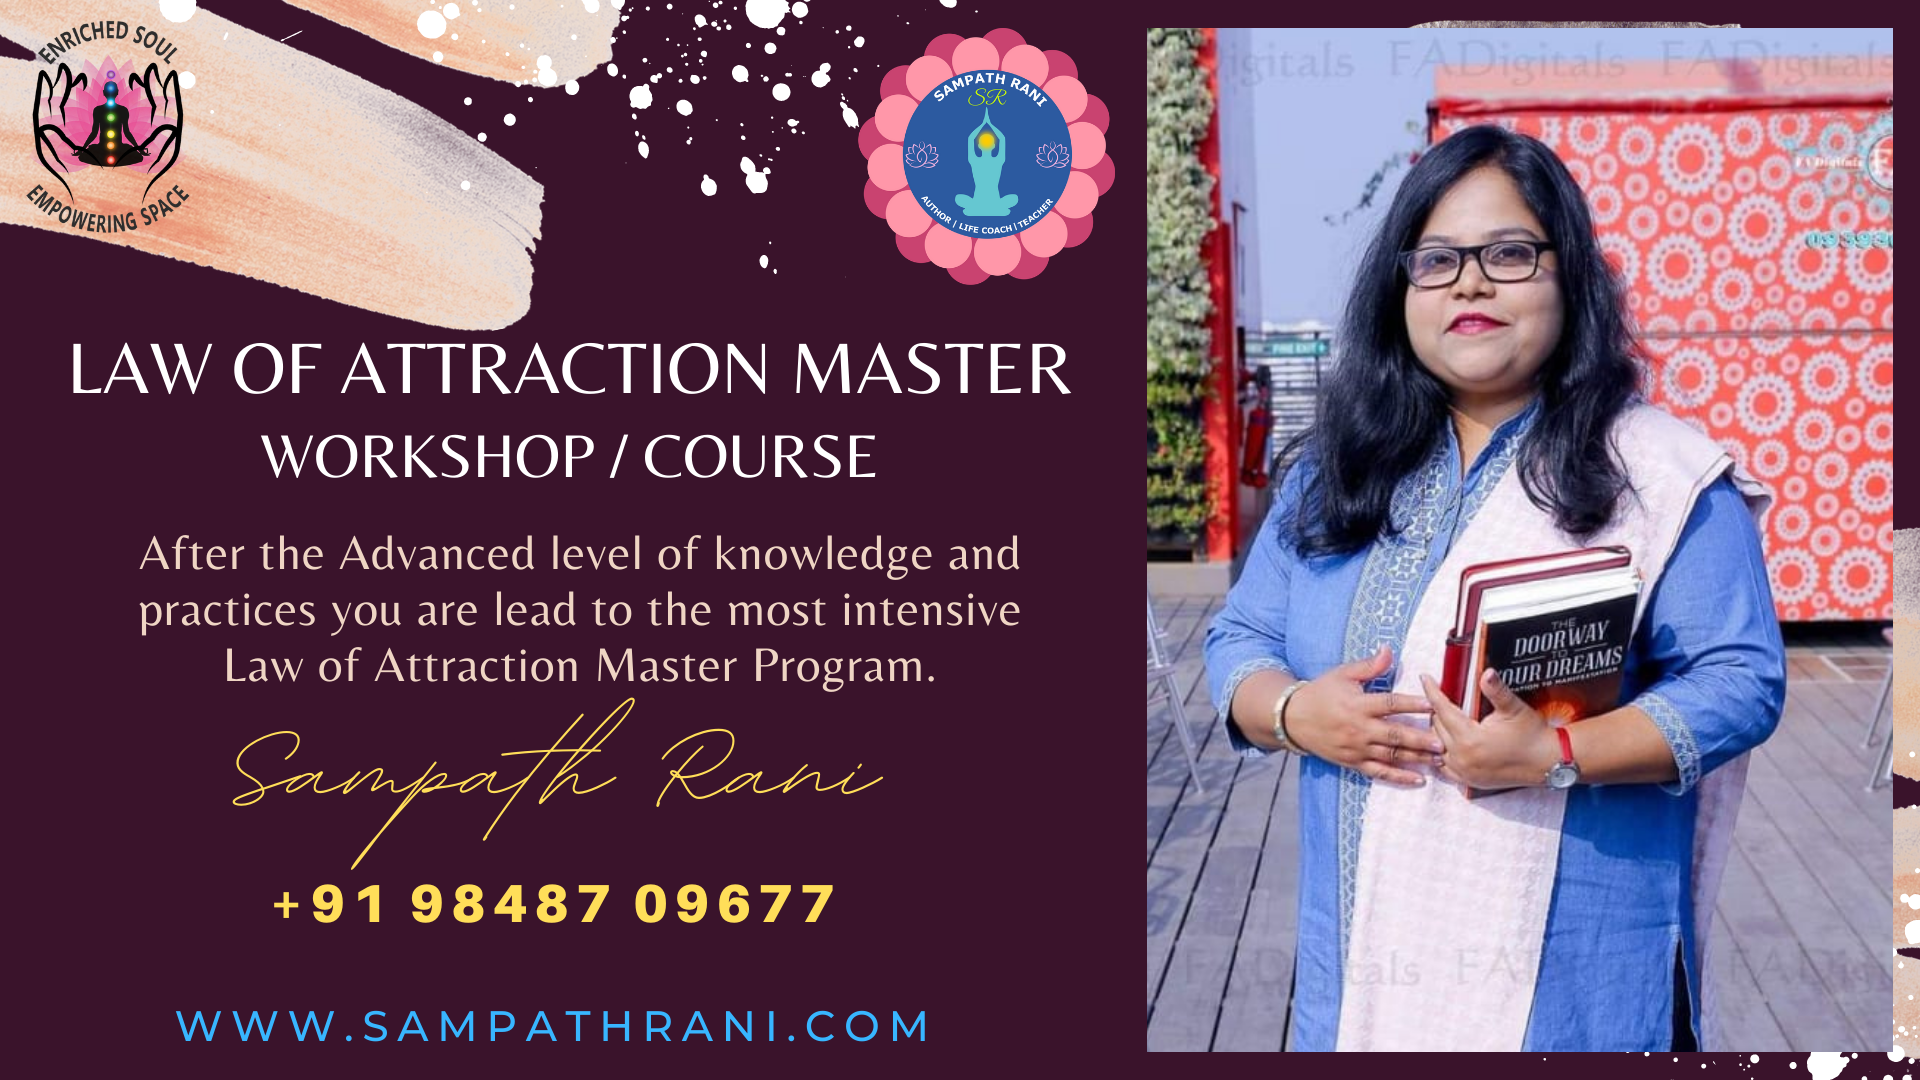 Law of Attraction Master Workshop, Course - by Sampath Rani - Surat